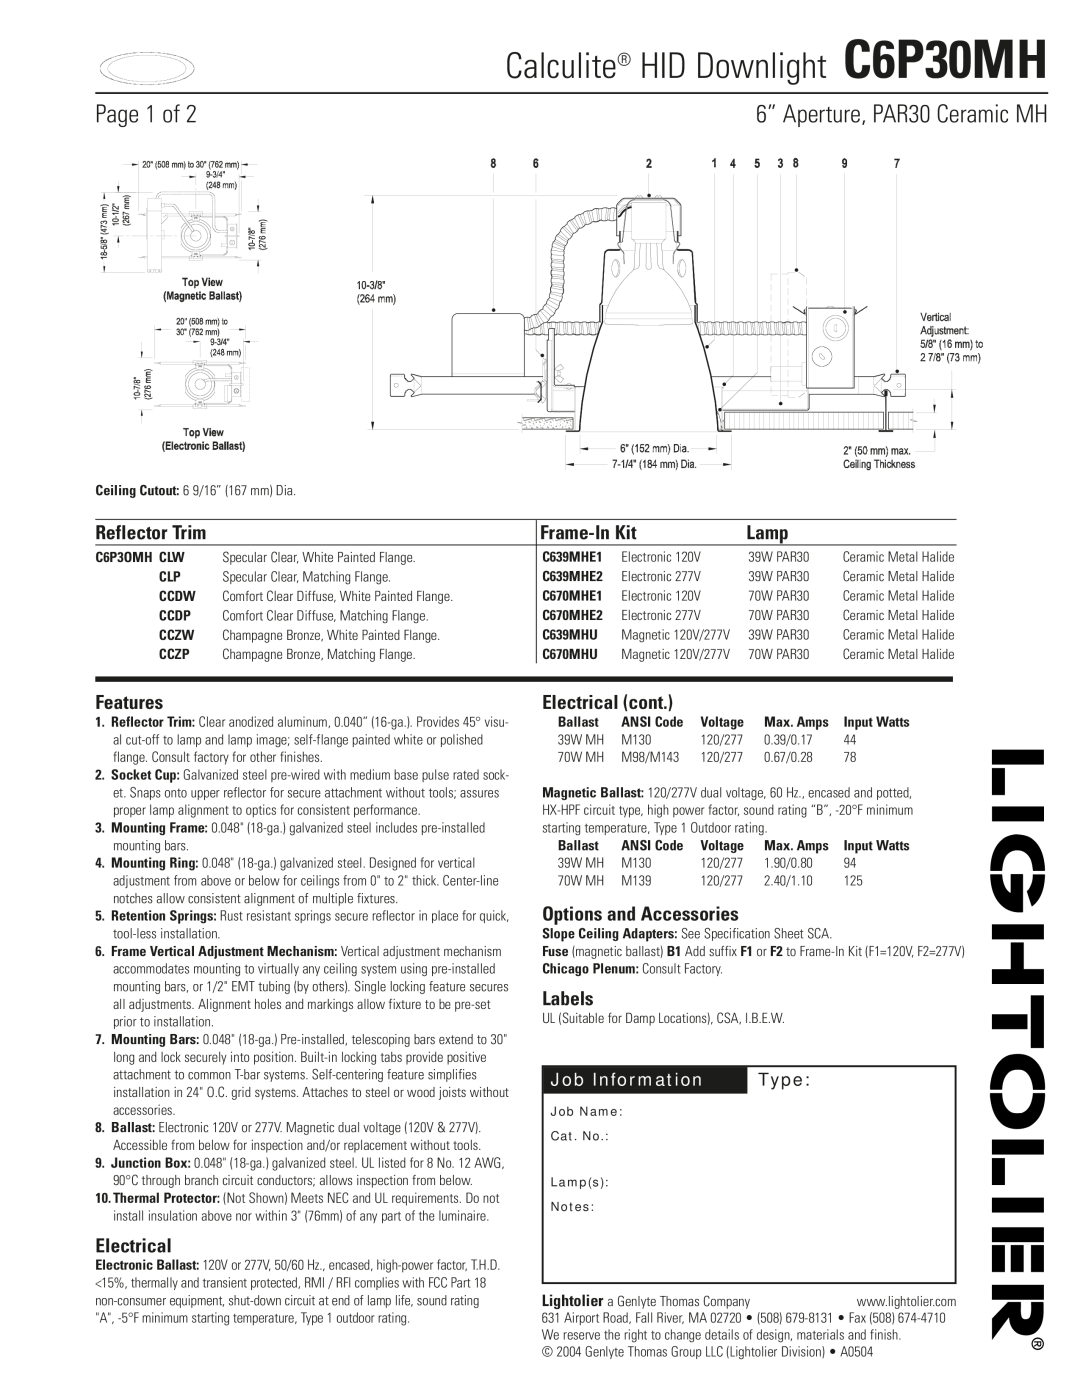 Lightolier specifications Calculite HID Downlight C6P30MH, Page 1 of, 6” Aperture, PAR30 Ceramic MH, Reflector Trim 